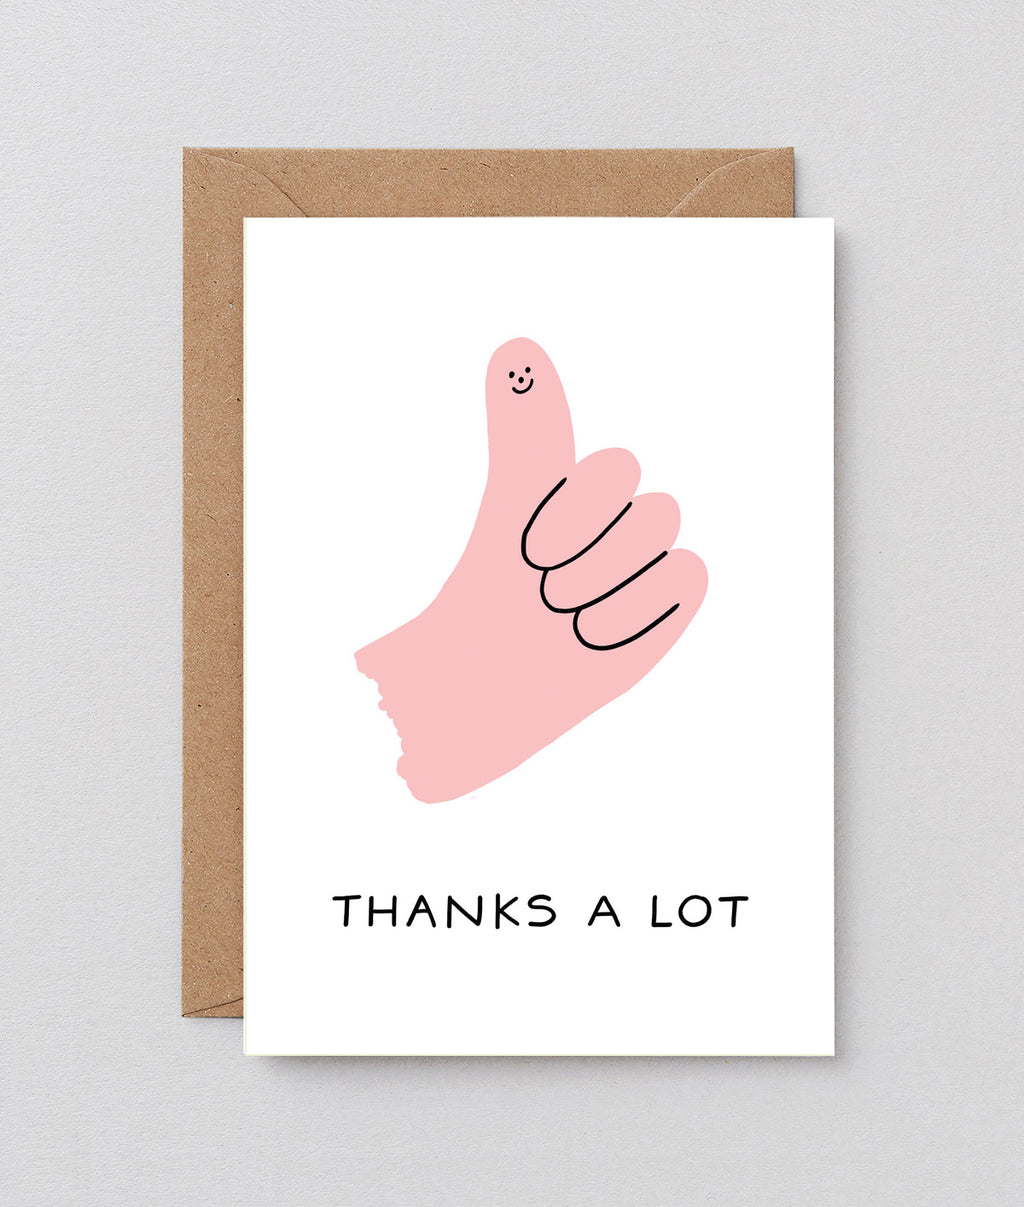 Wrap Thumbs Up Greeting Card